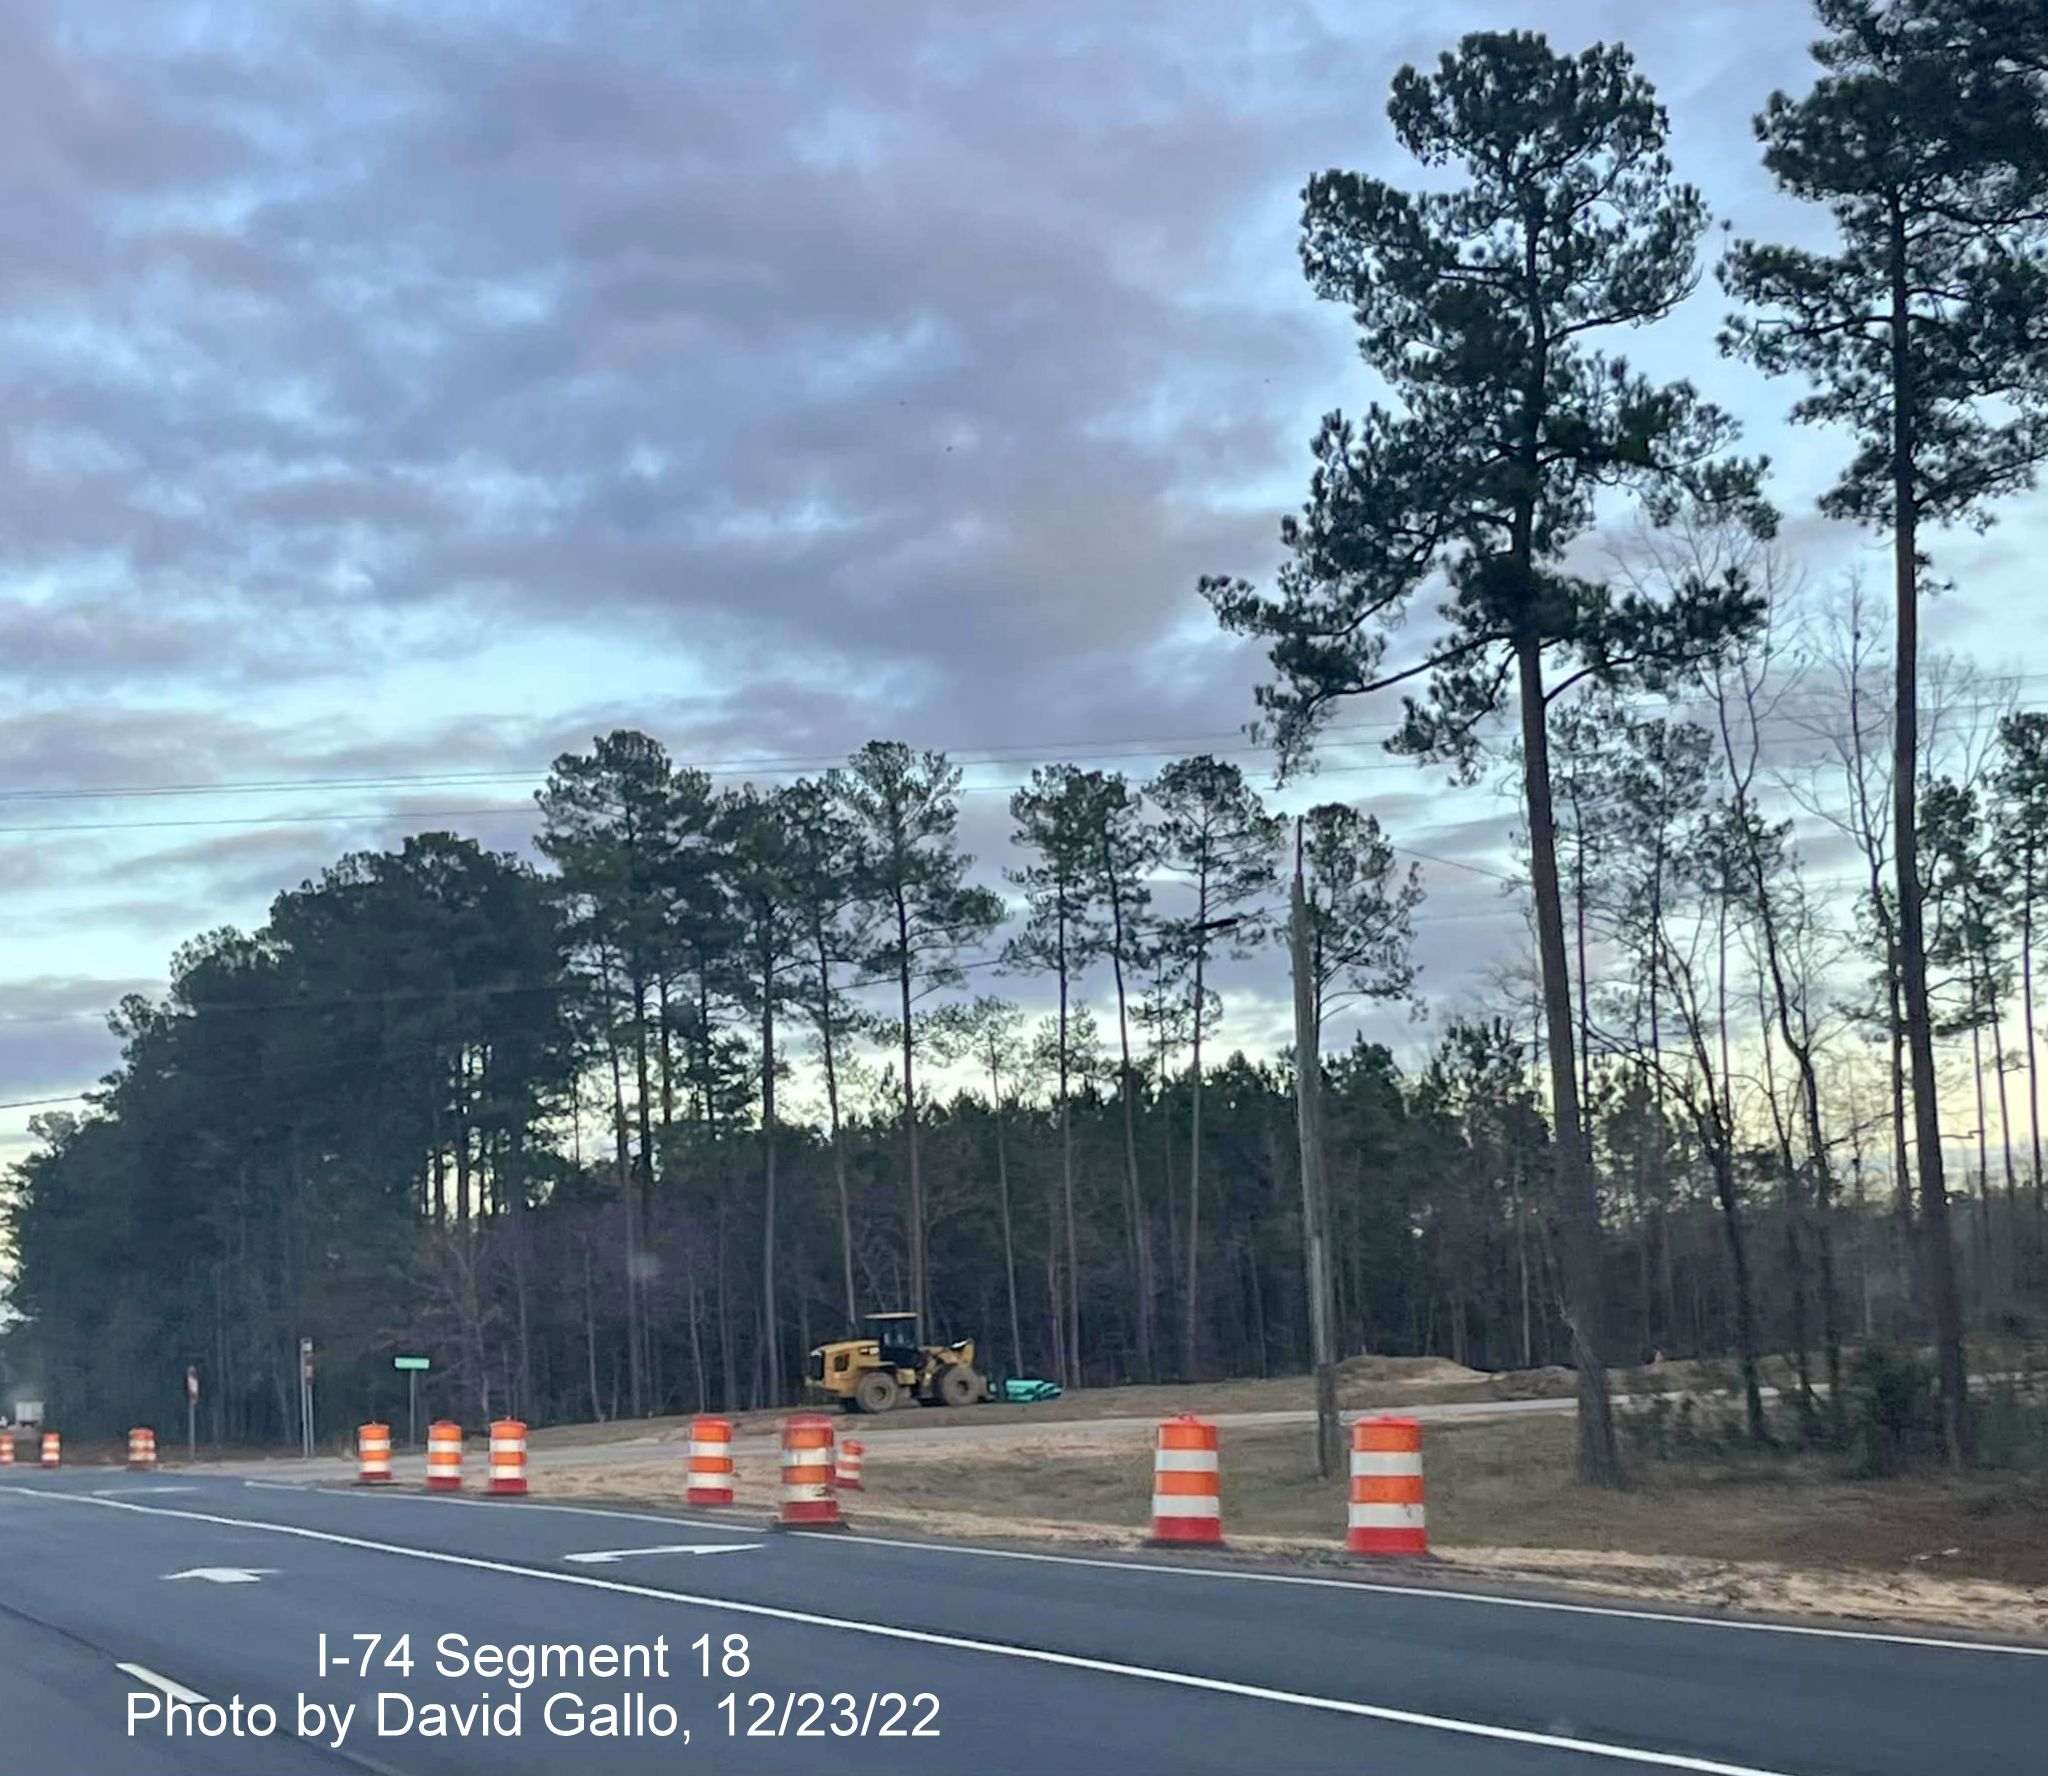 Image of Old Lake Road intersection in Lake Waccamaw interchange work zone on US 74/76 East, by David Gallo, December 2022